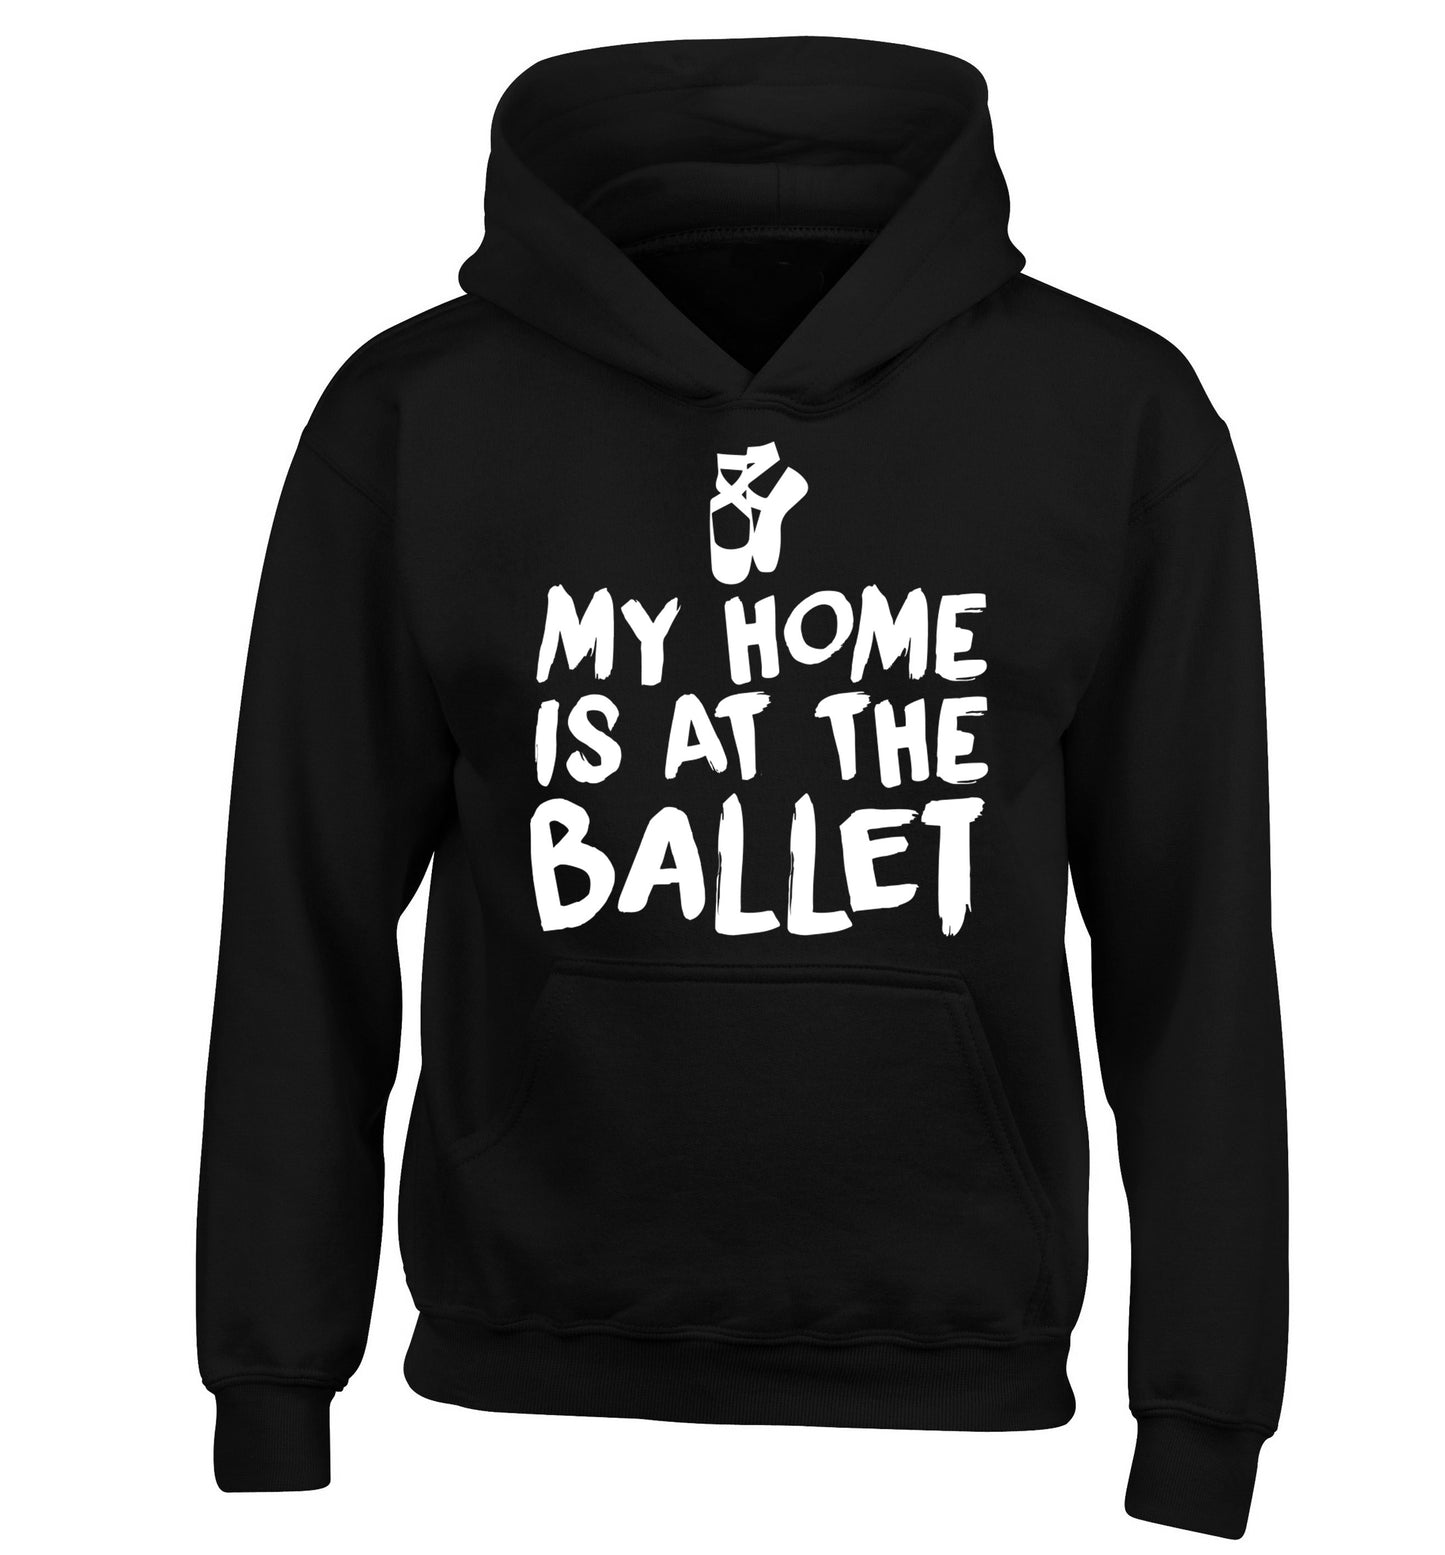 My home is at the ballet children's black hoodie 12-14 Years